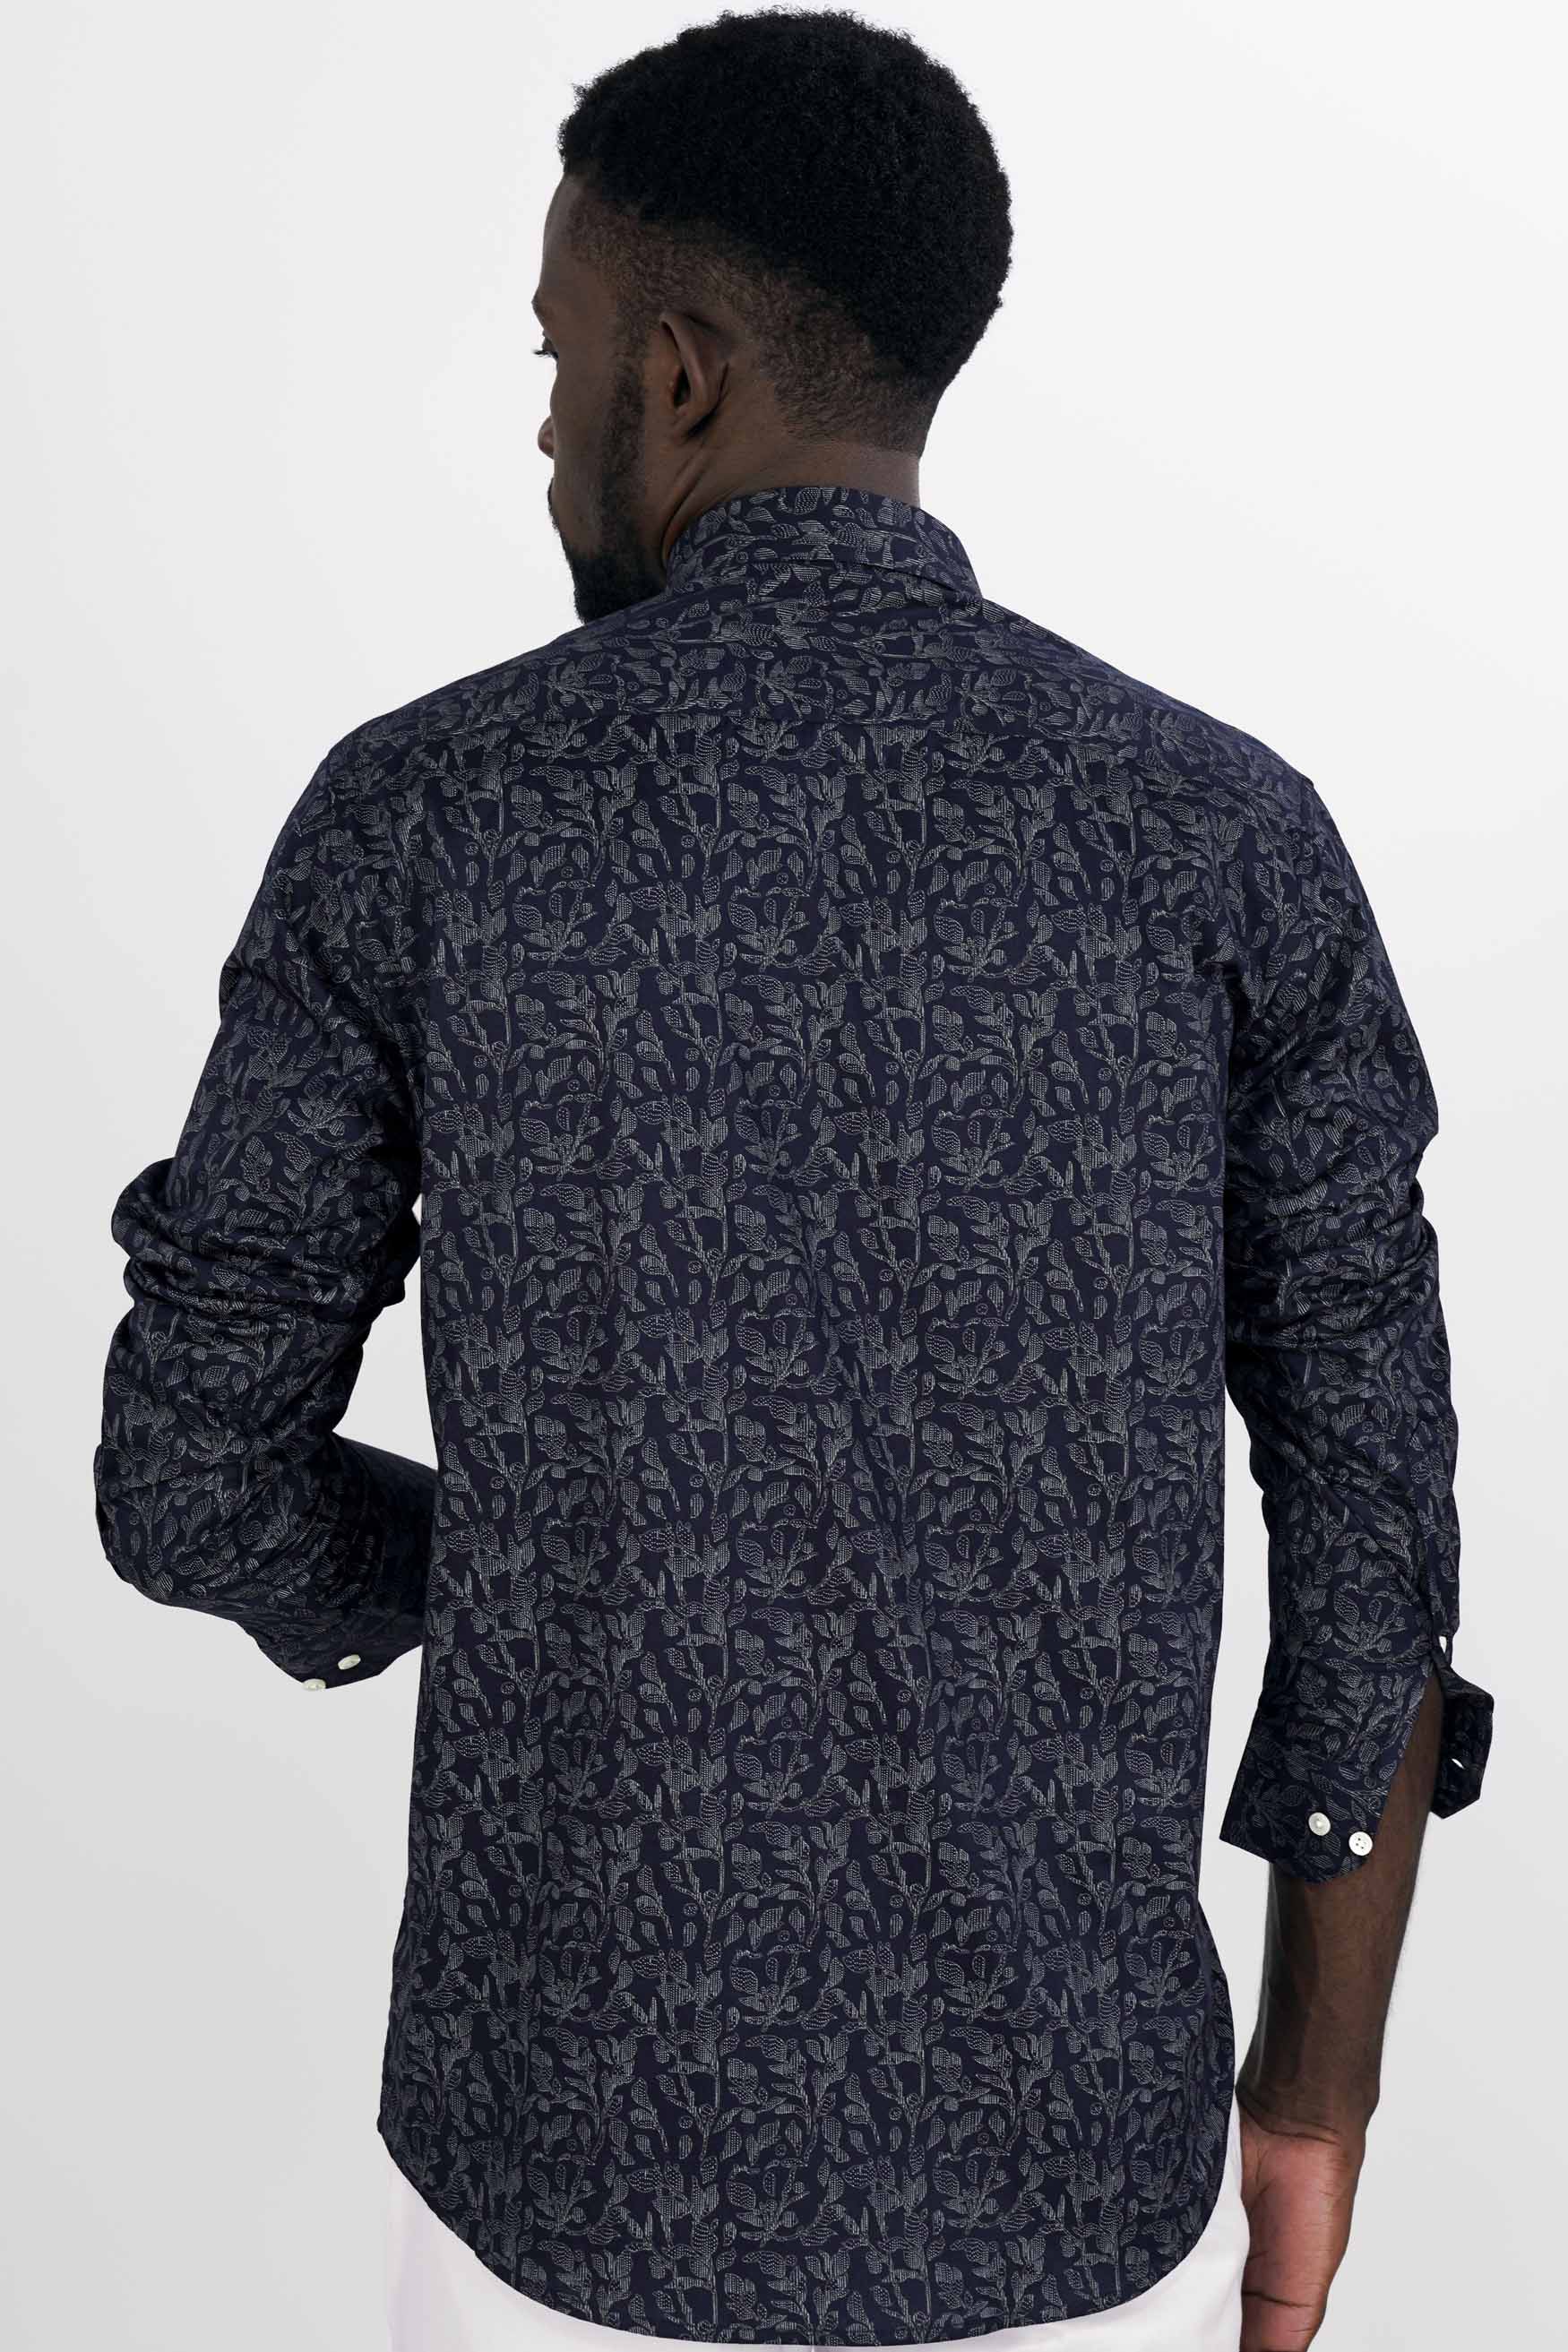 Onyx Blue with Cloudy Brown and White Leaves Printed Twill Premium Cotton Shirt